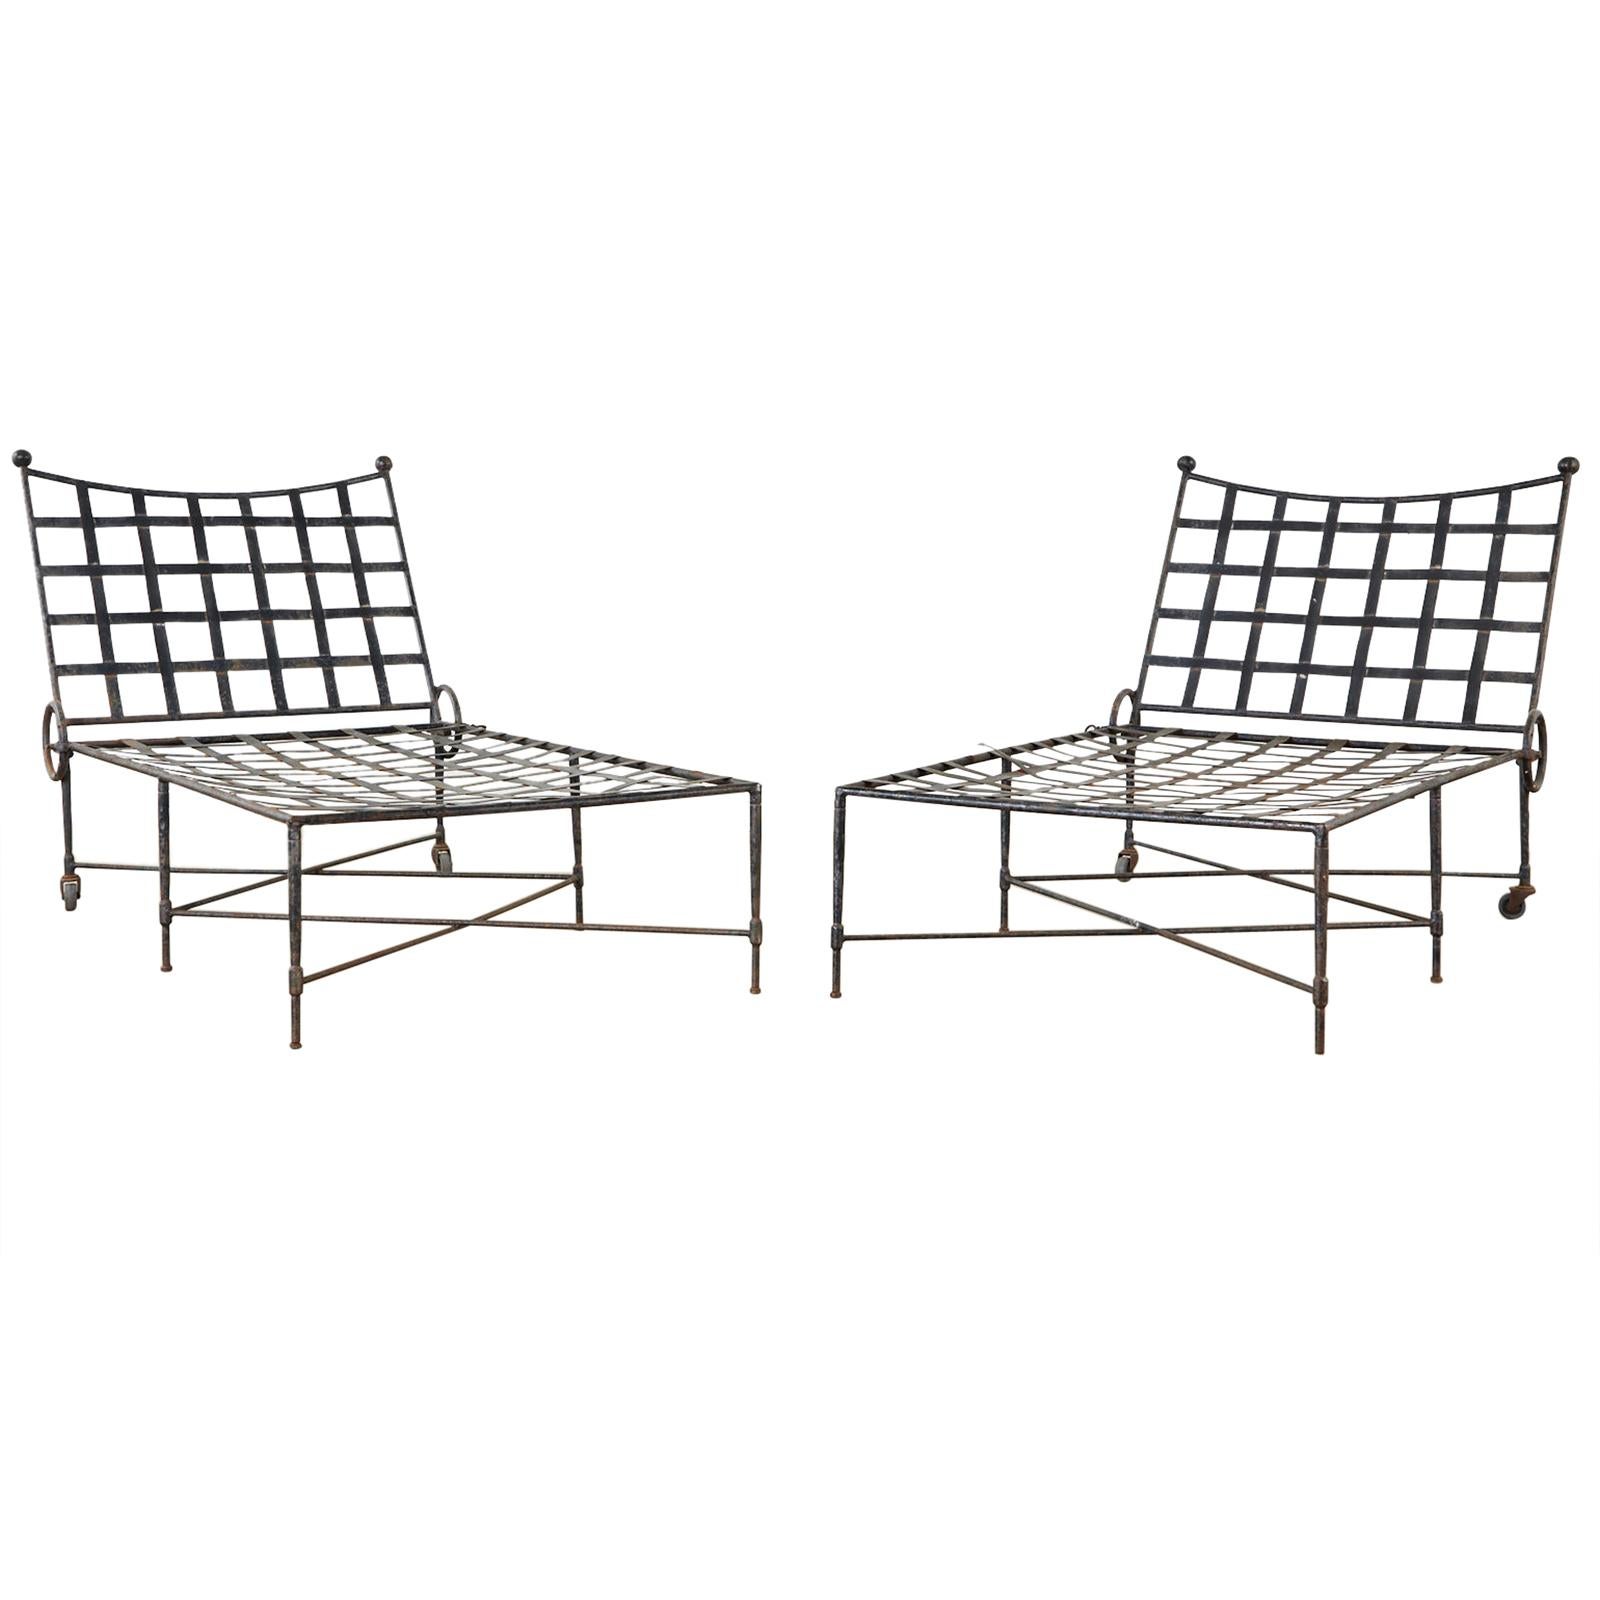 Pair of Mario Papperzini for Salterini Patinated Iron Chaise Lounges